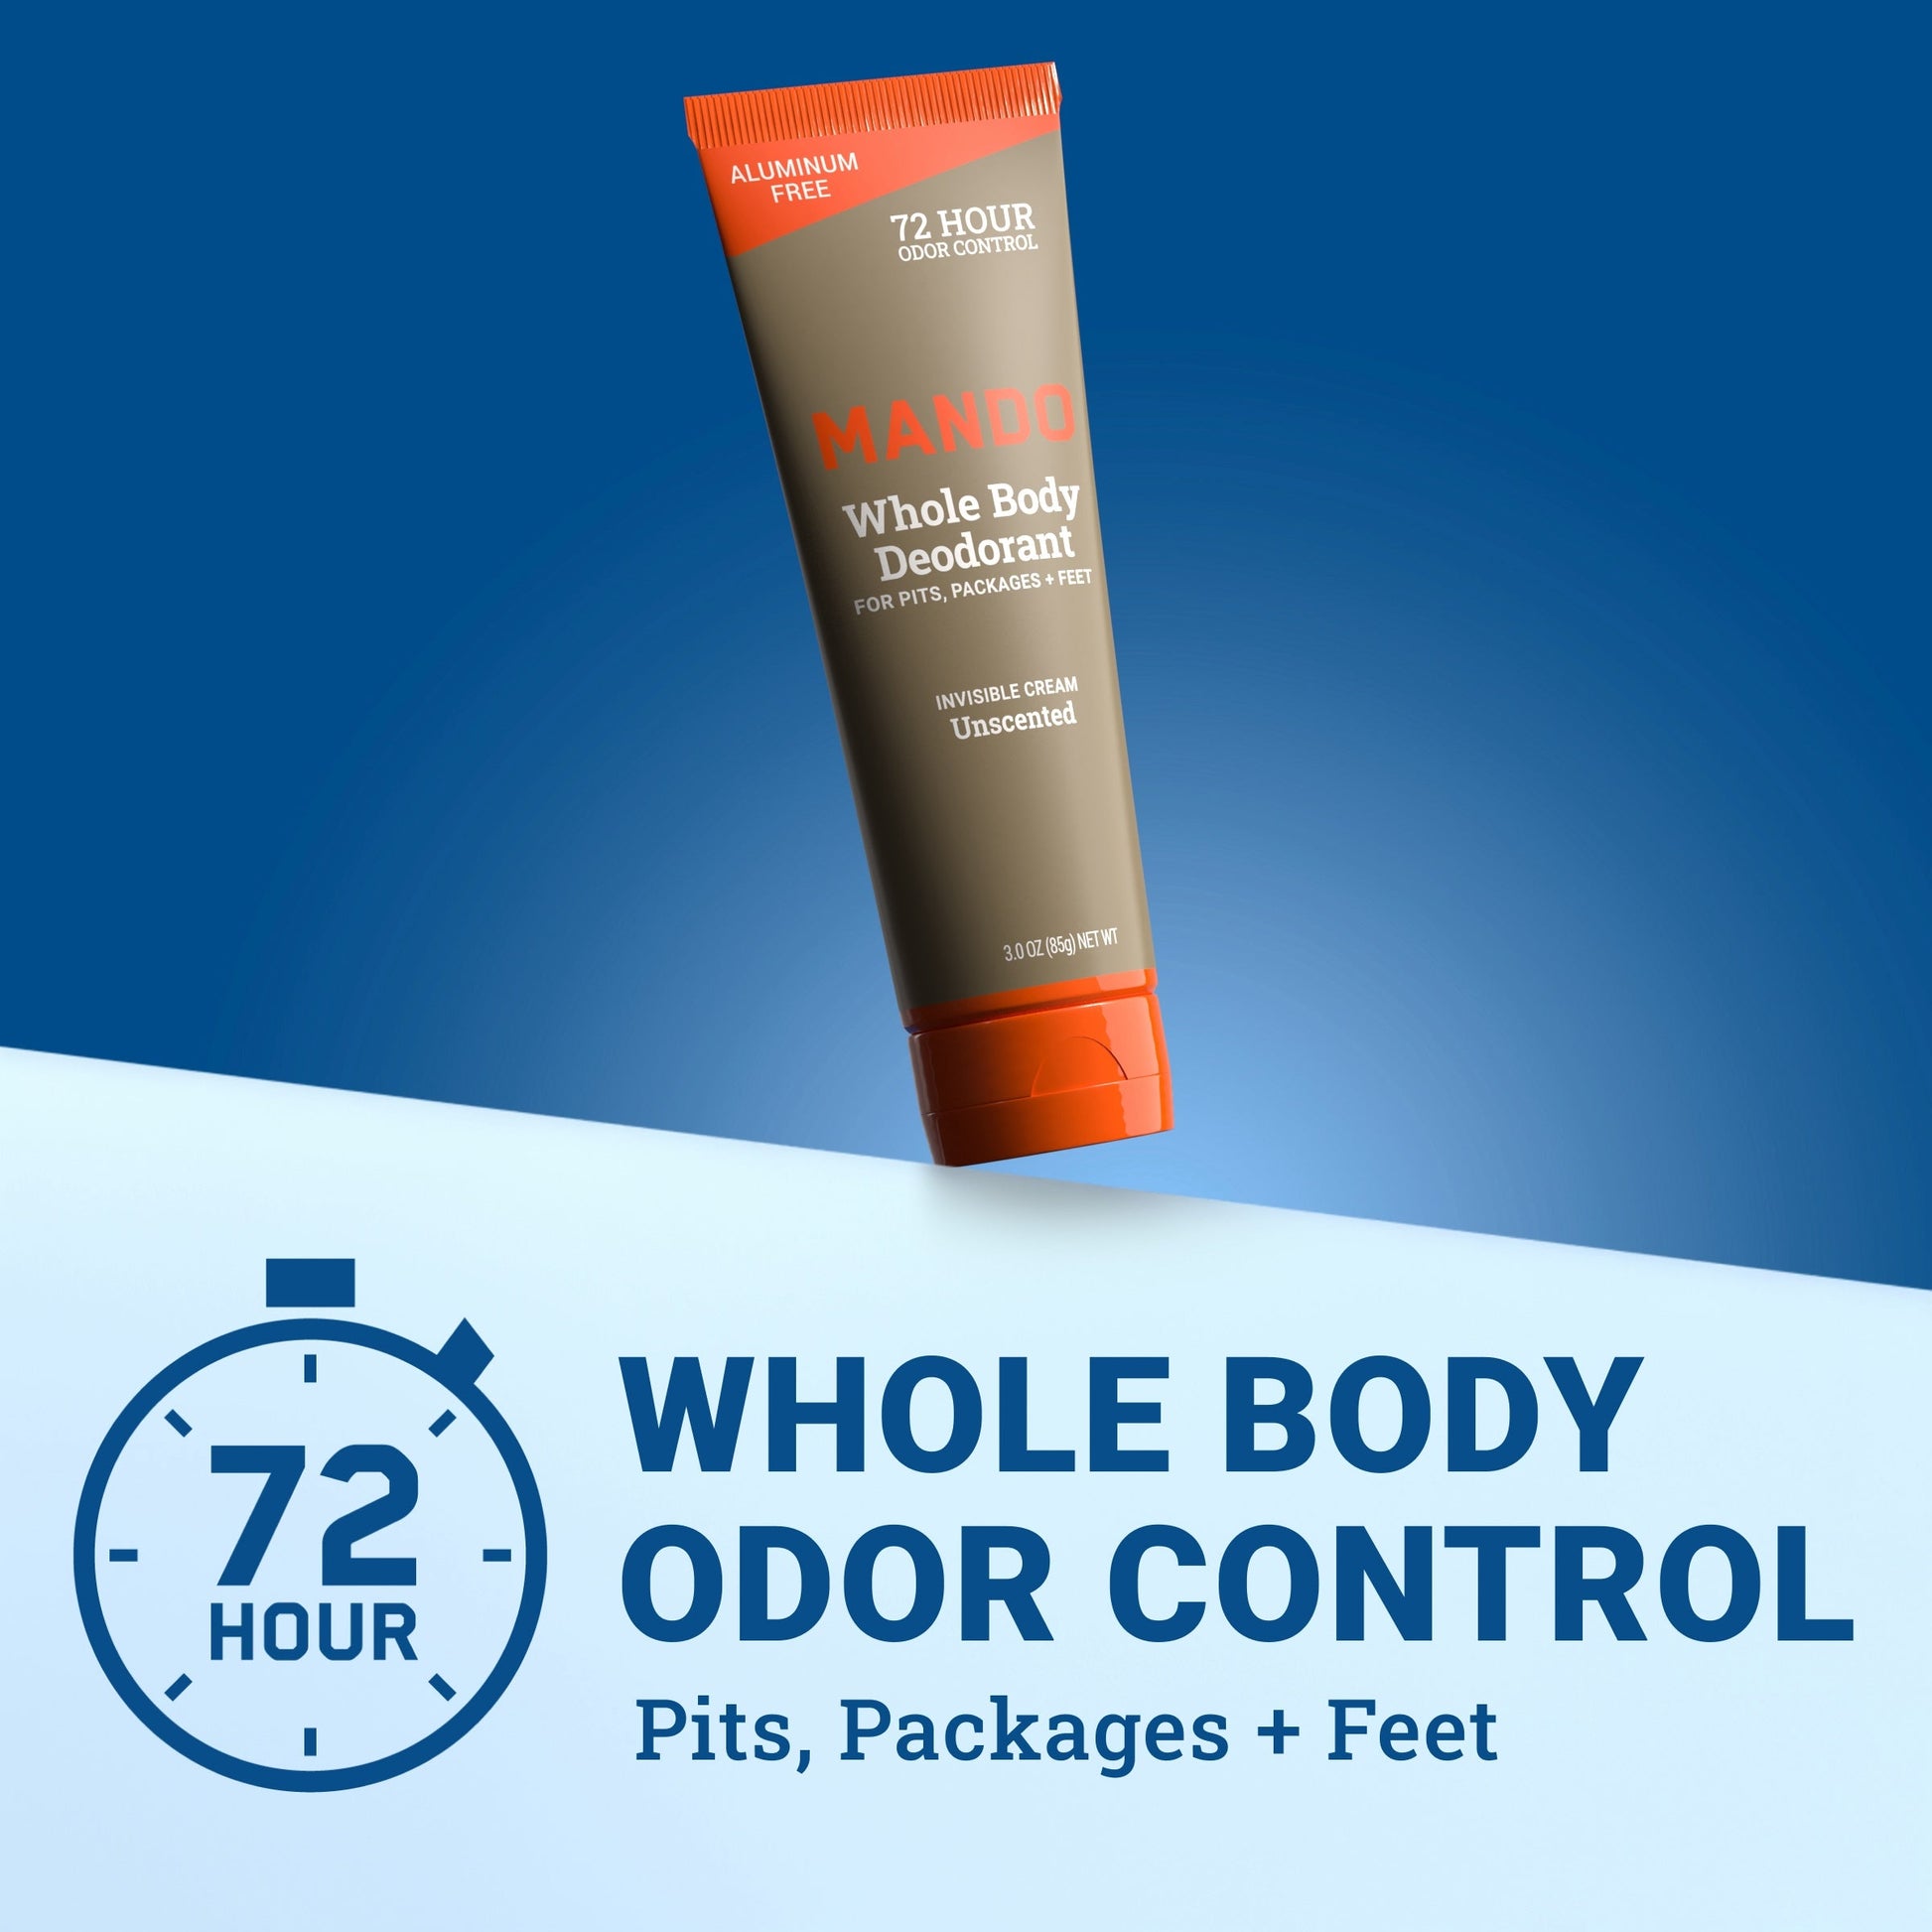 Mando Invisible cream deodorant in unscented scent with text: 72 hour whole body odor control, pits, package + feet 